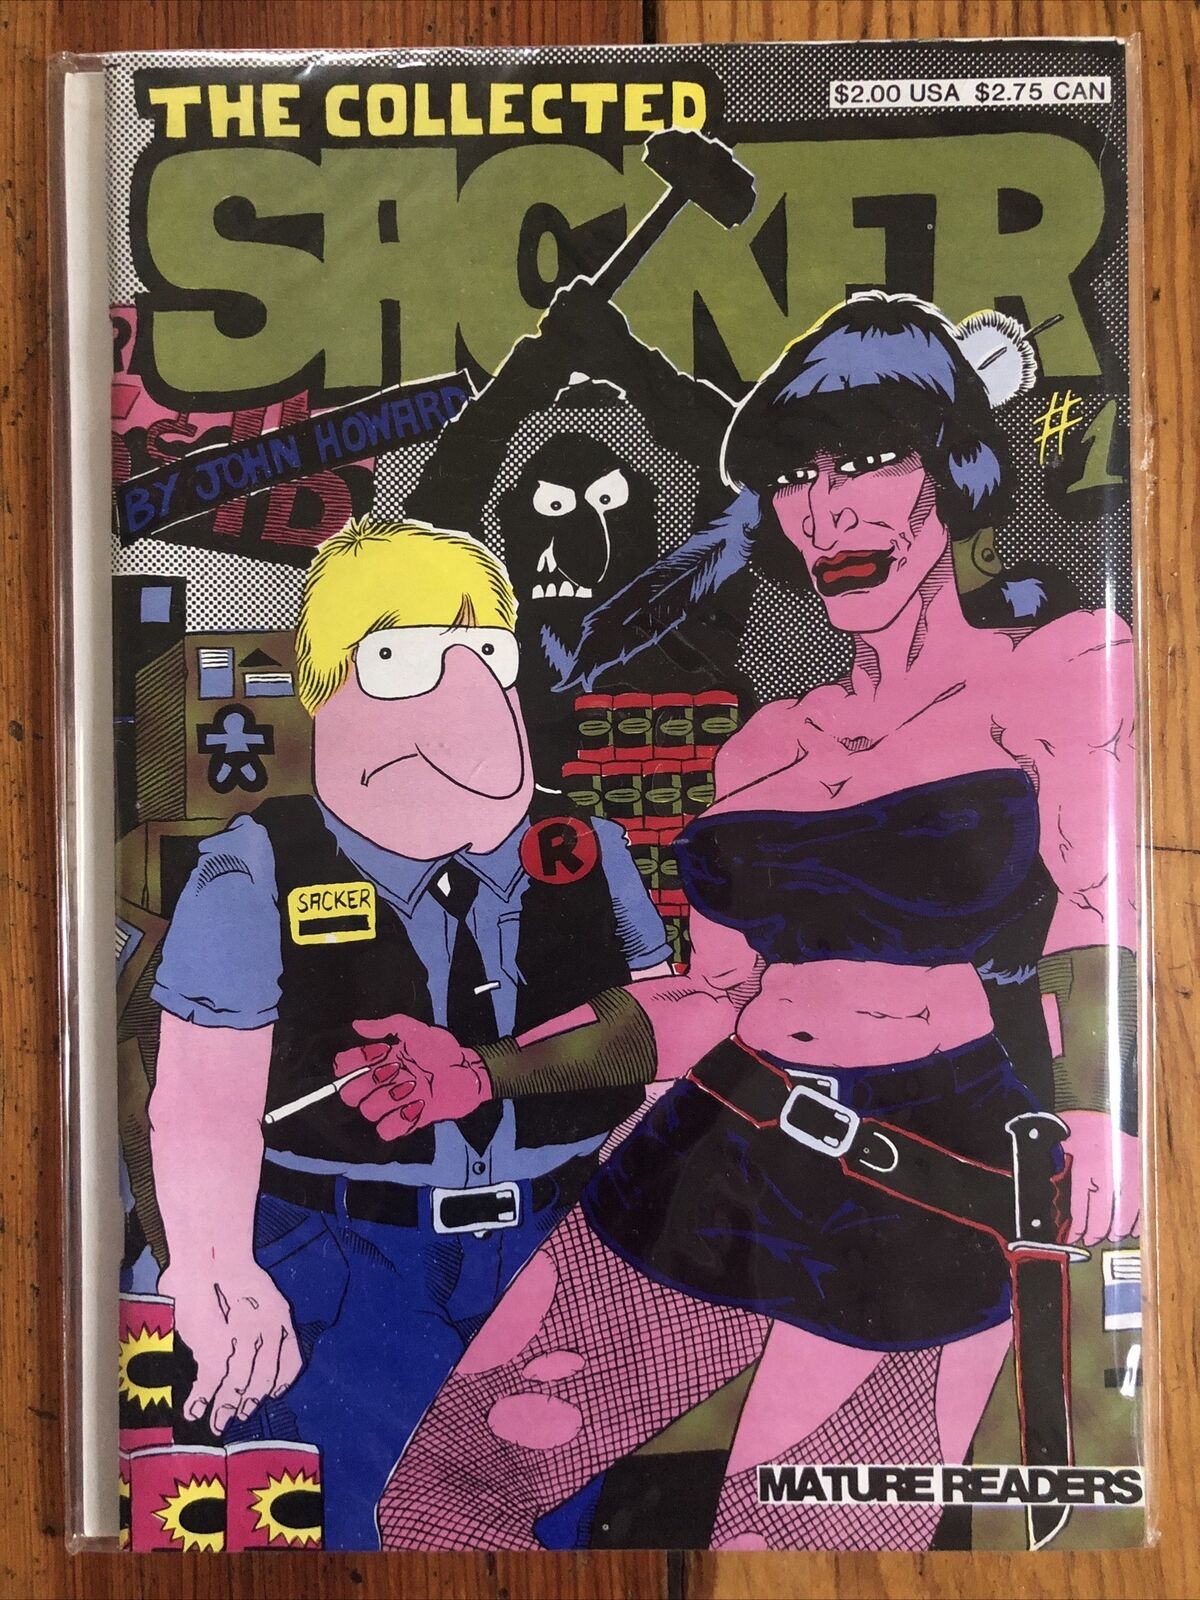 The Collected Sacker #1 by John Howard (1986 Nerve) Vintage Underground FINE